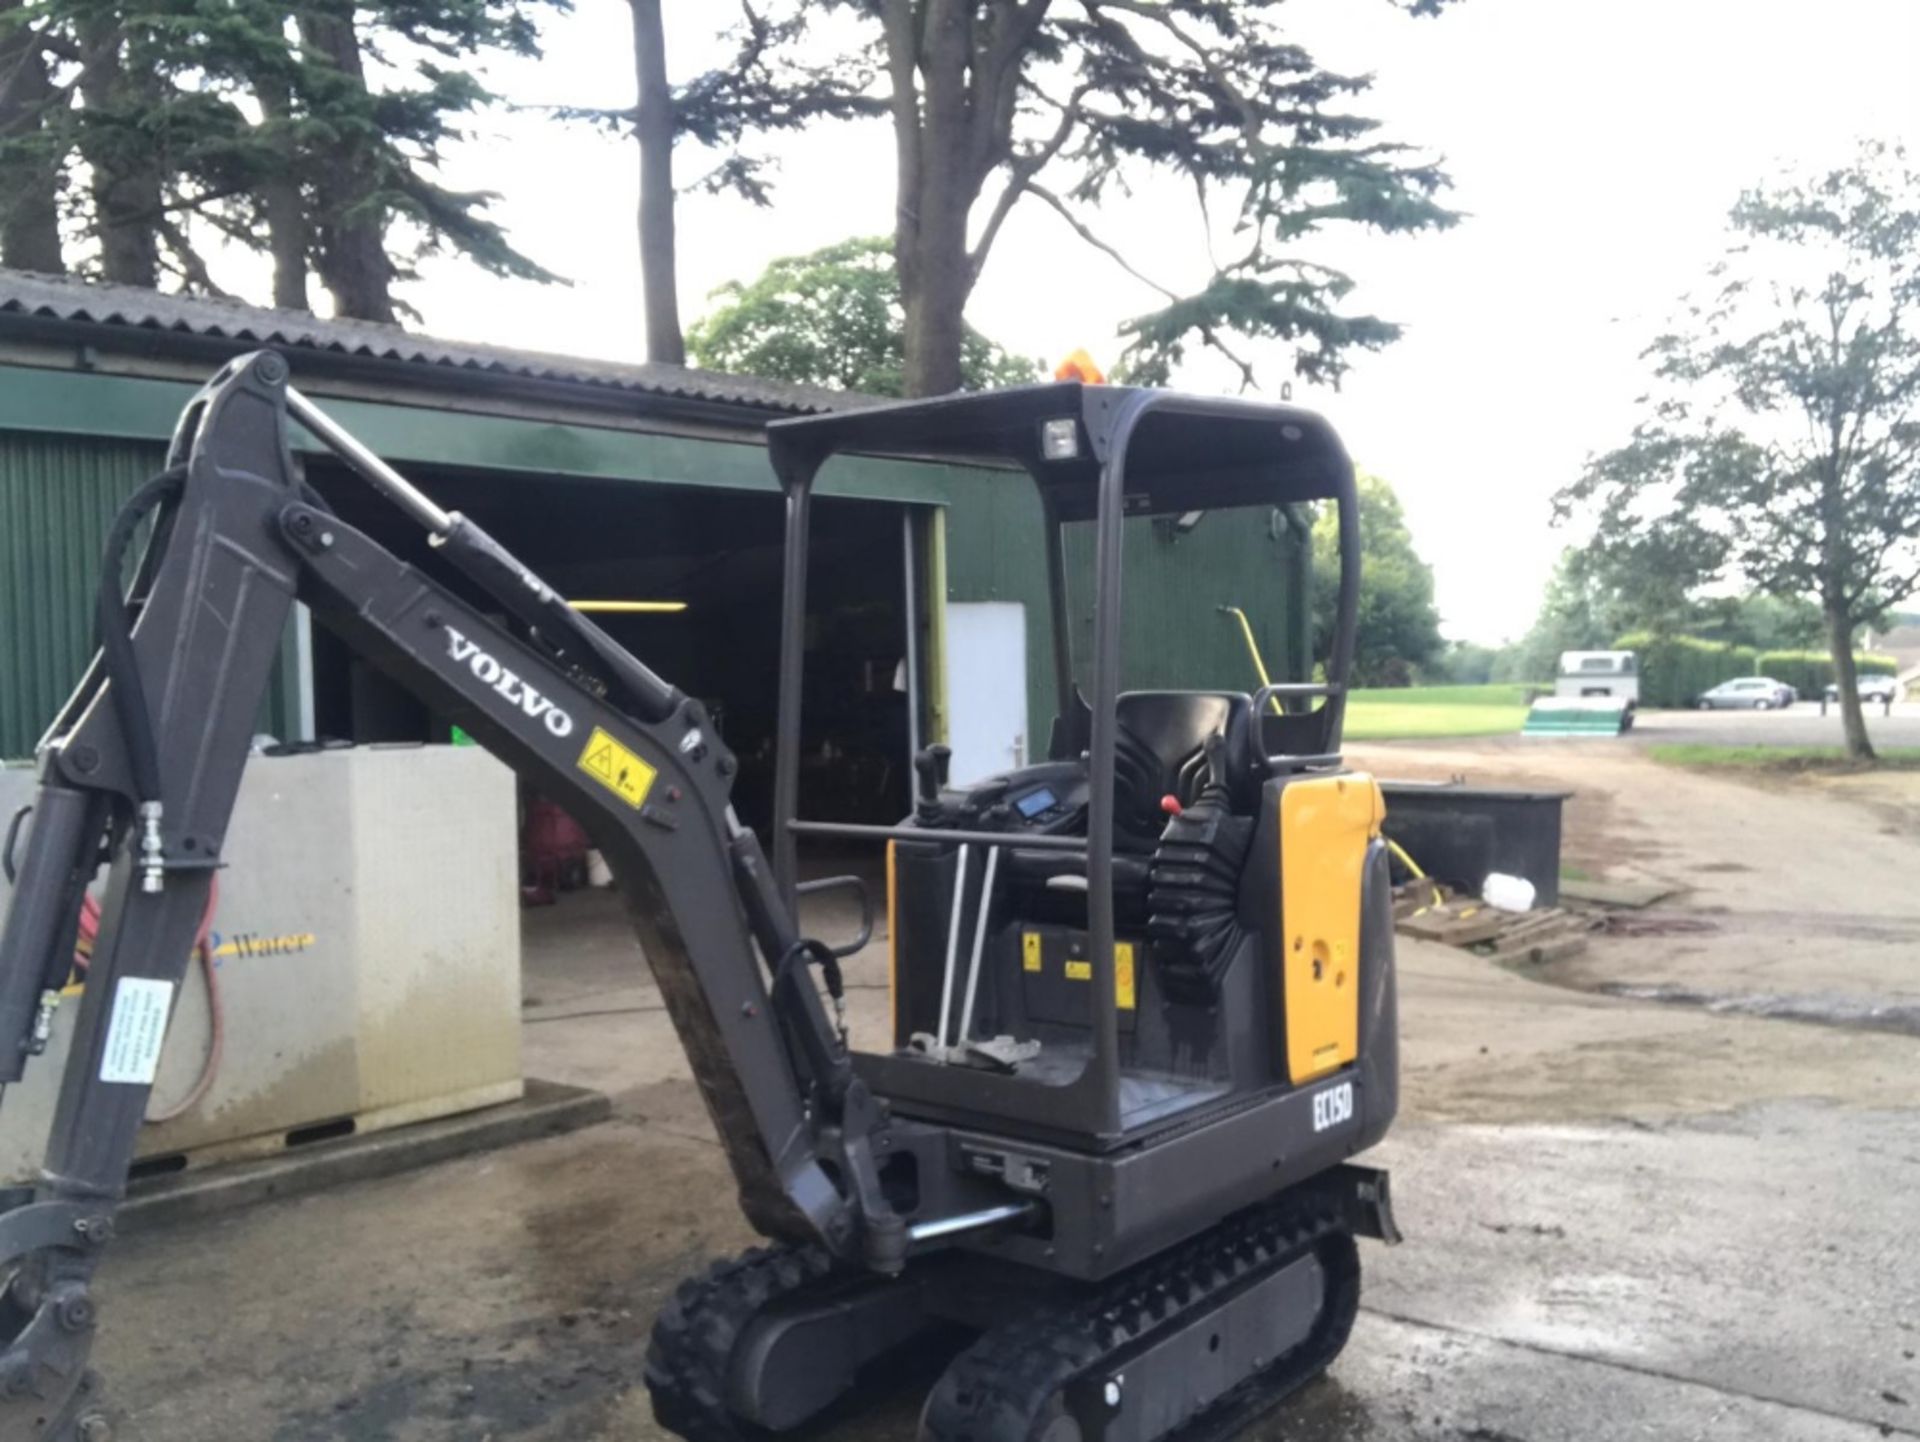 VOLVO EC15D 1.5 TONNE MINI DIGGER WITH SET OF BUCKETS YEAR 2015 BUILD. OWNED BY SELLER FROM NEW - Image 13 of 18